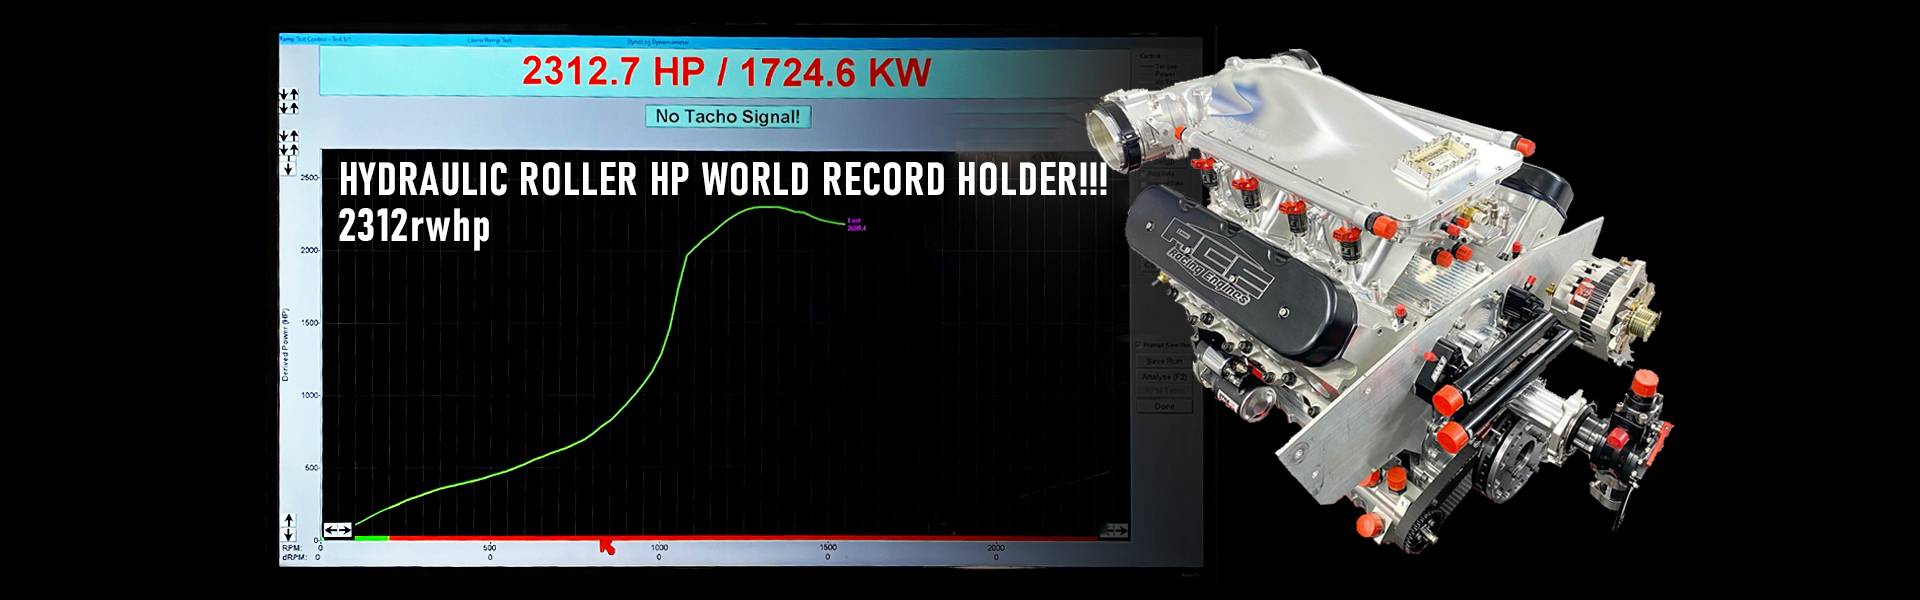 Stefan Rossi owner and chief engine builder at ACERacing Engines, Breaks the V8 Hydraulic Roller RWHP world record!